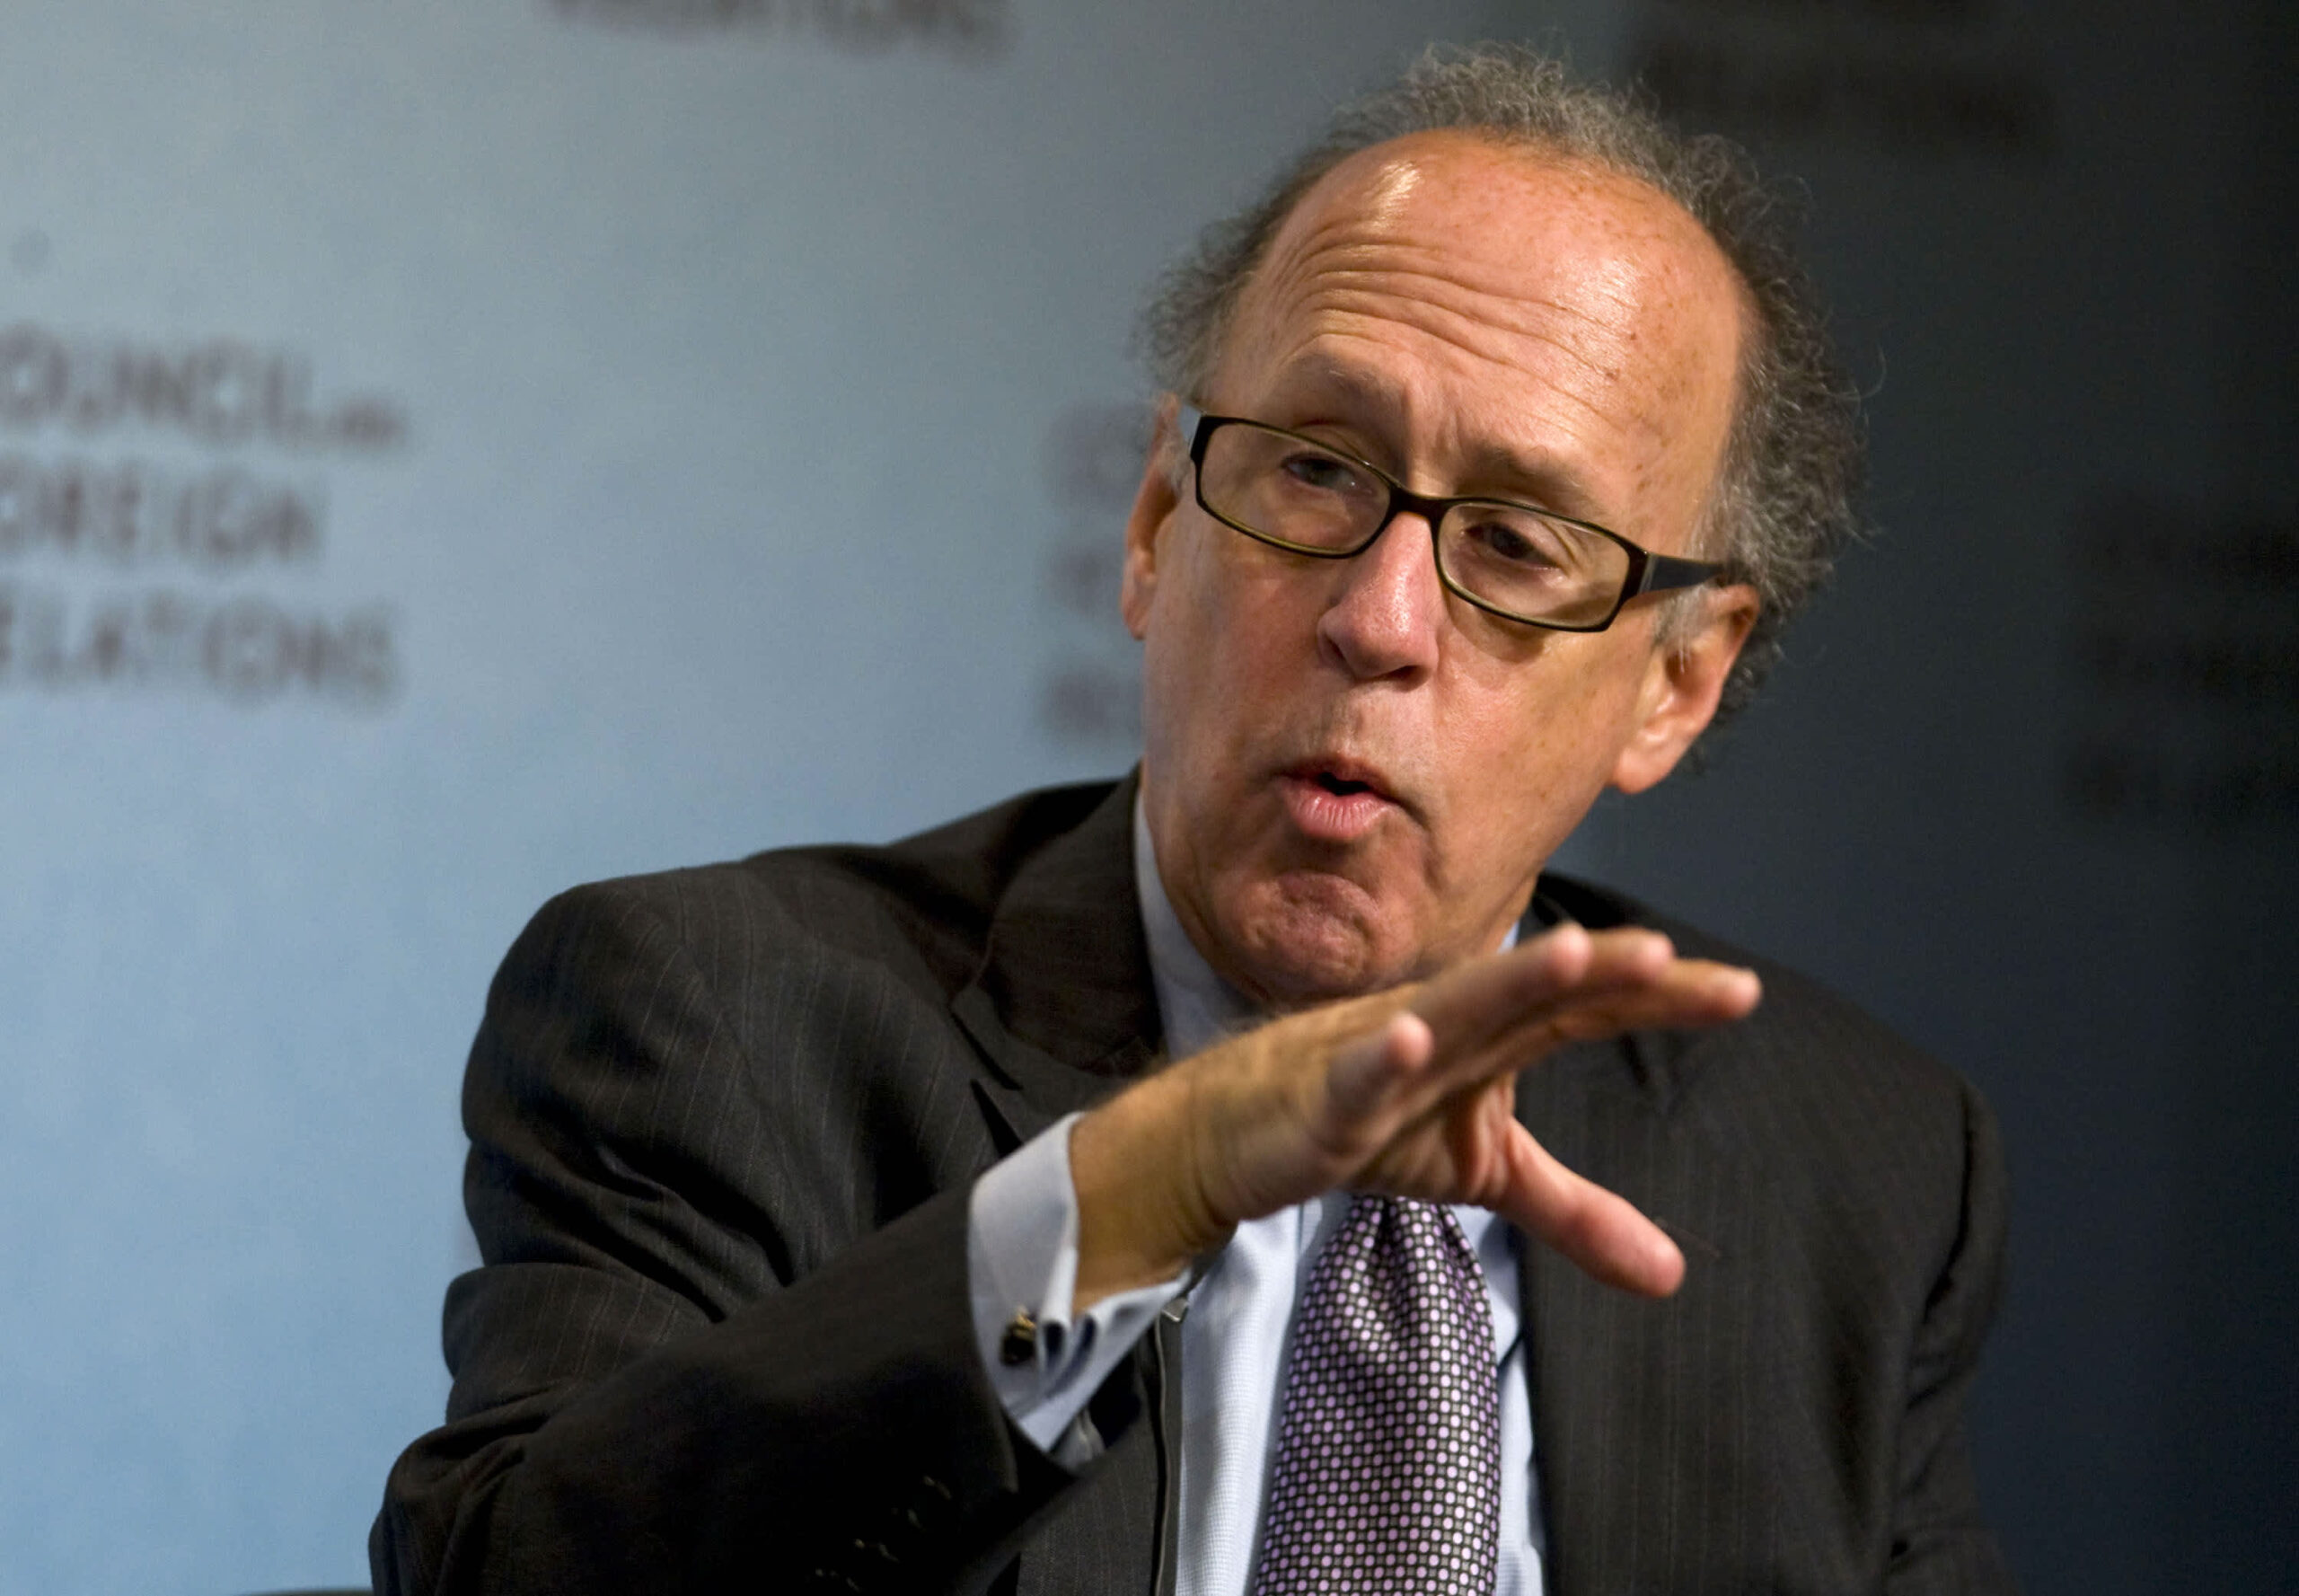 Economist Stephen Roach questions Biden’s decision to keep Trump’s China policies